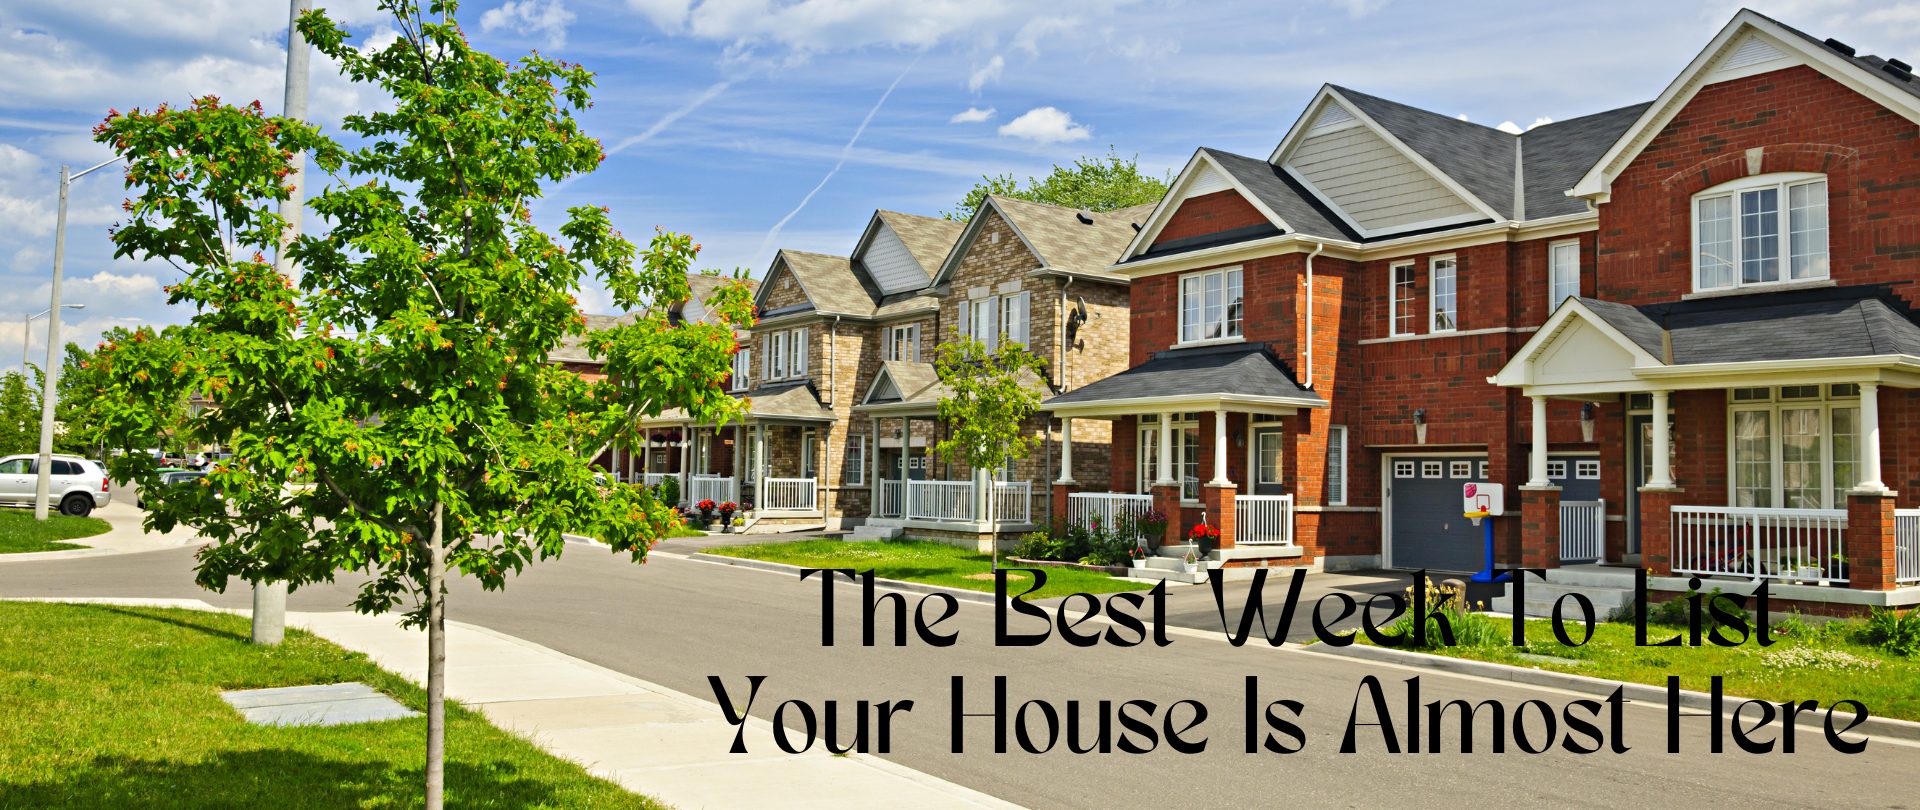 The Best Week To List Your House Is Almost Here